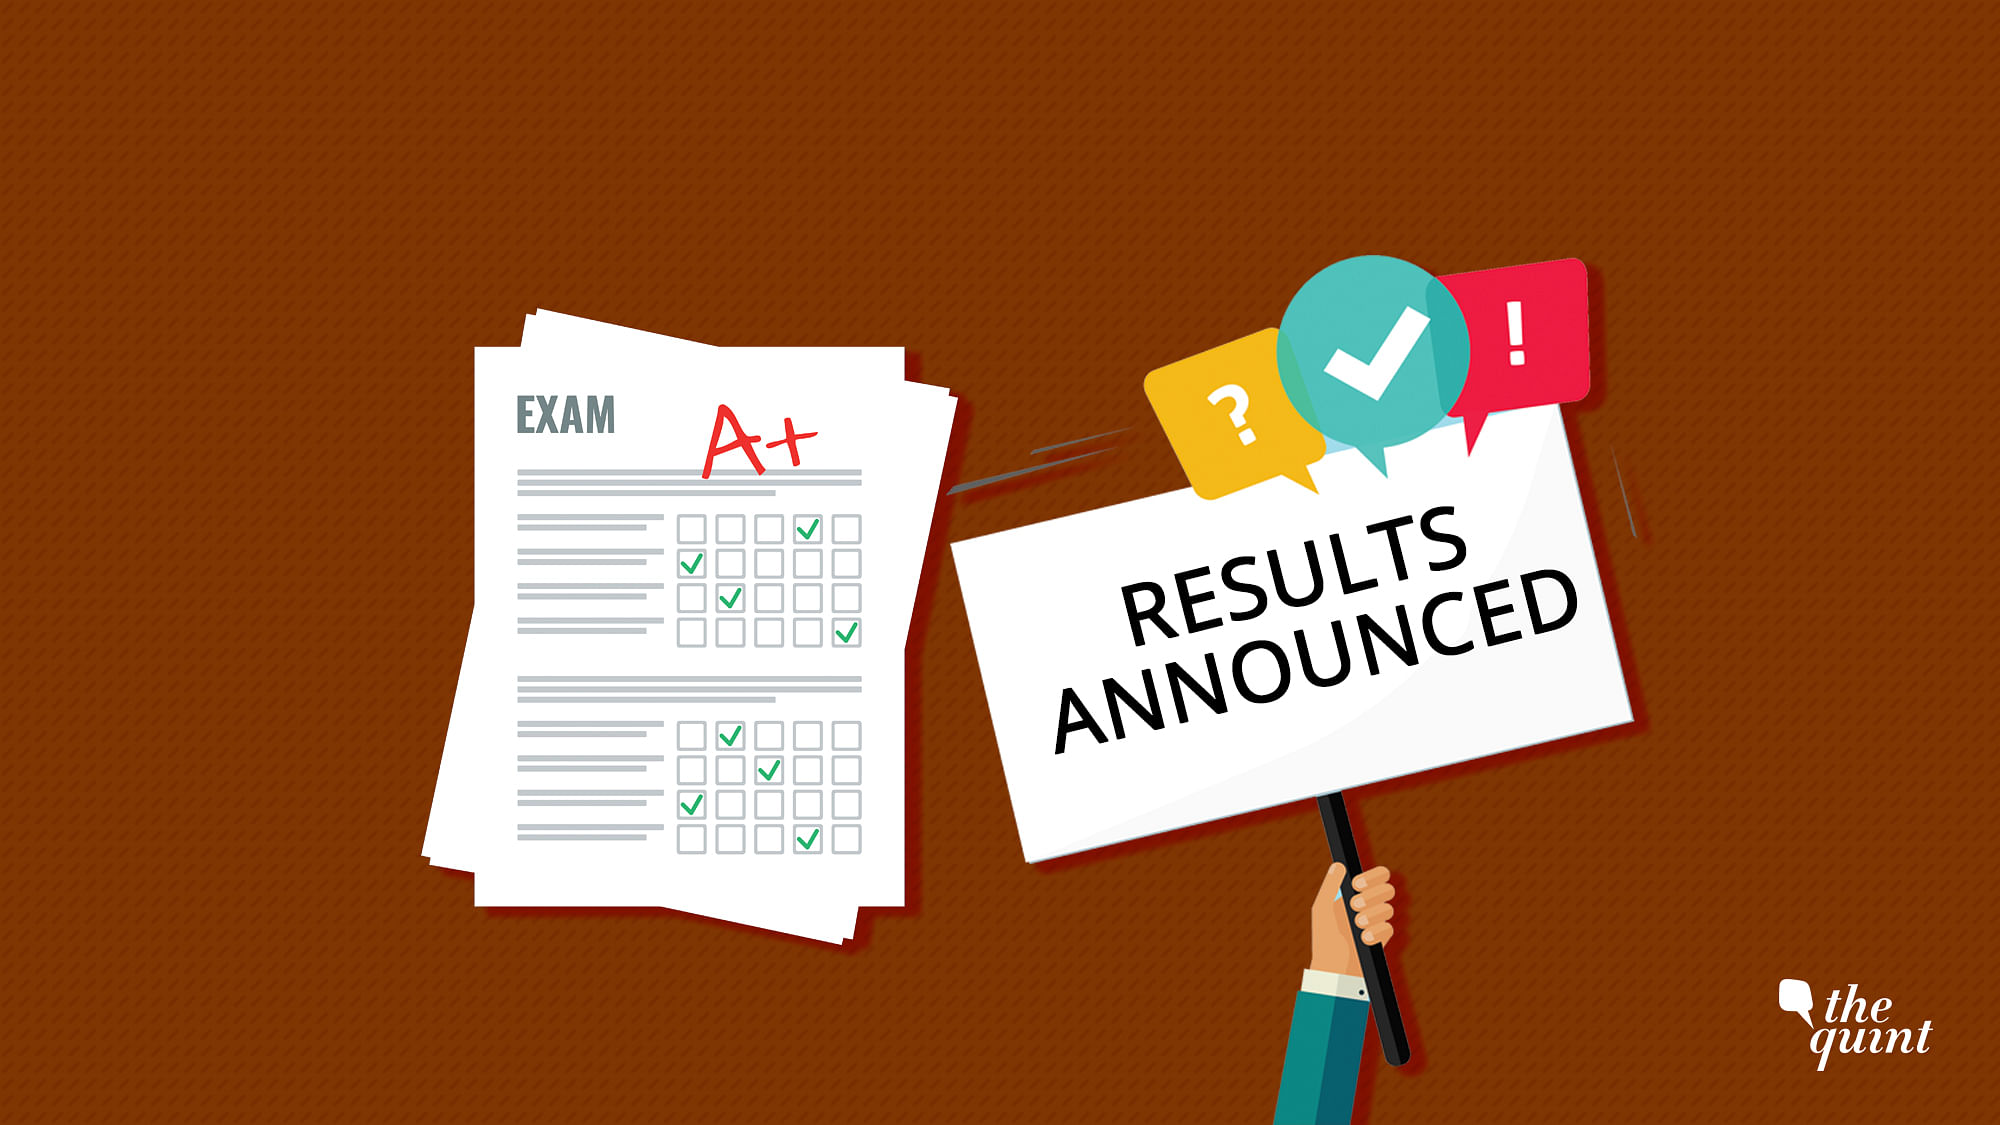  ICSE ISC Result 2019: ICSE class 10 and ISC class 12 results to be announced at 3 pm.